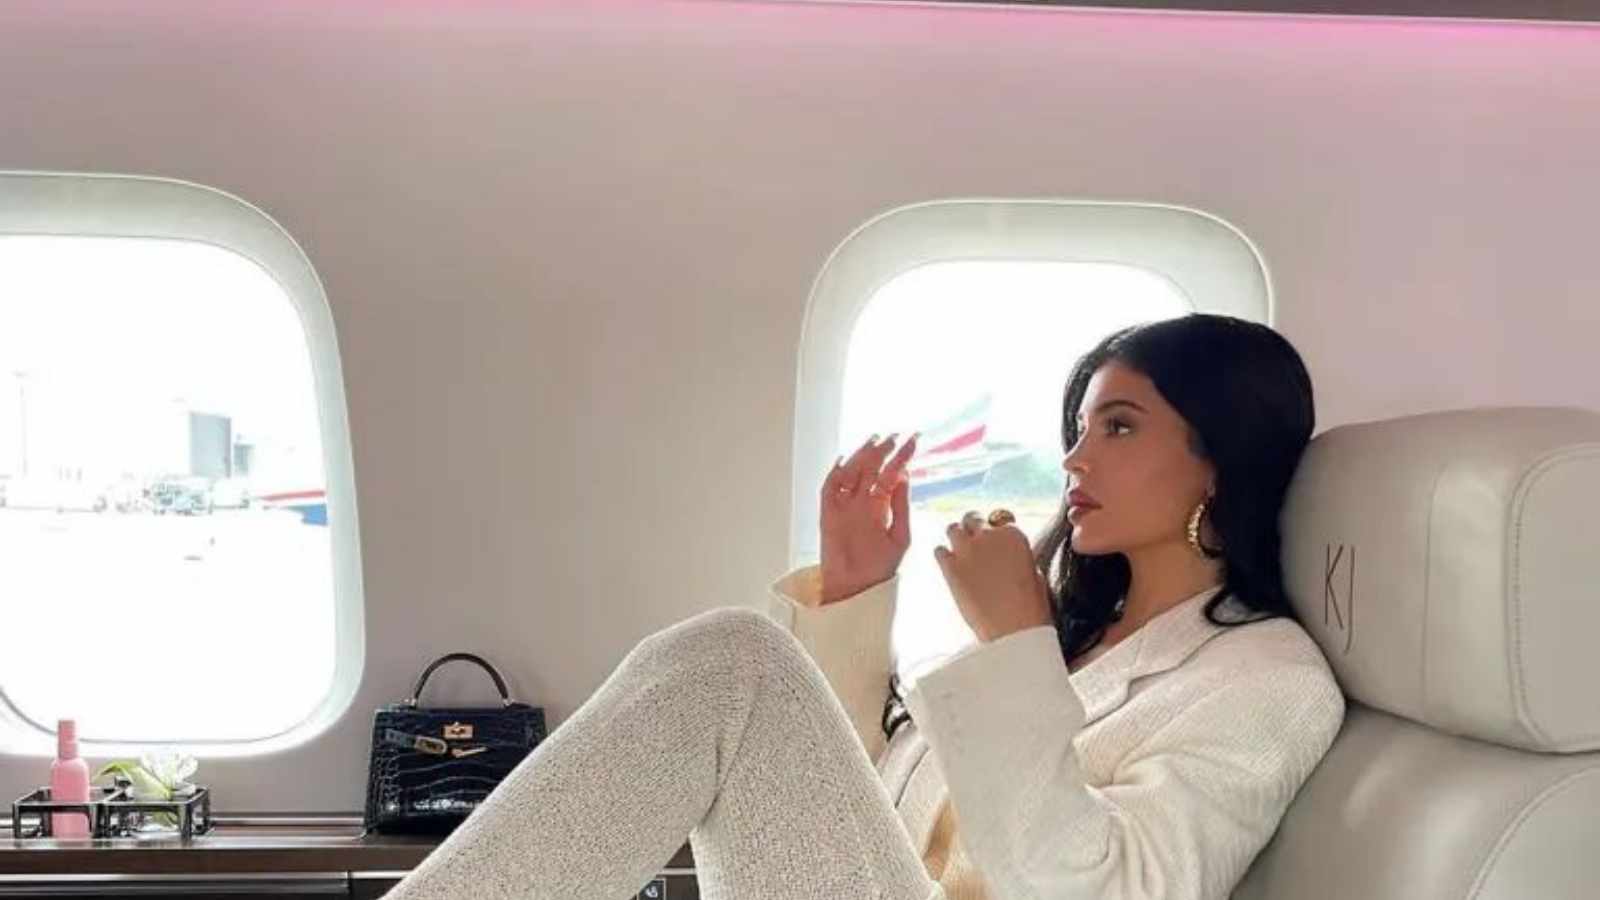 kylie jenner private jet tour